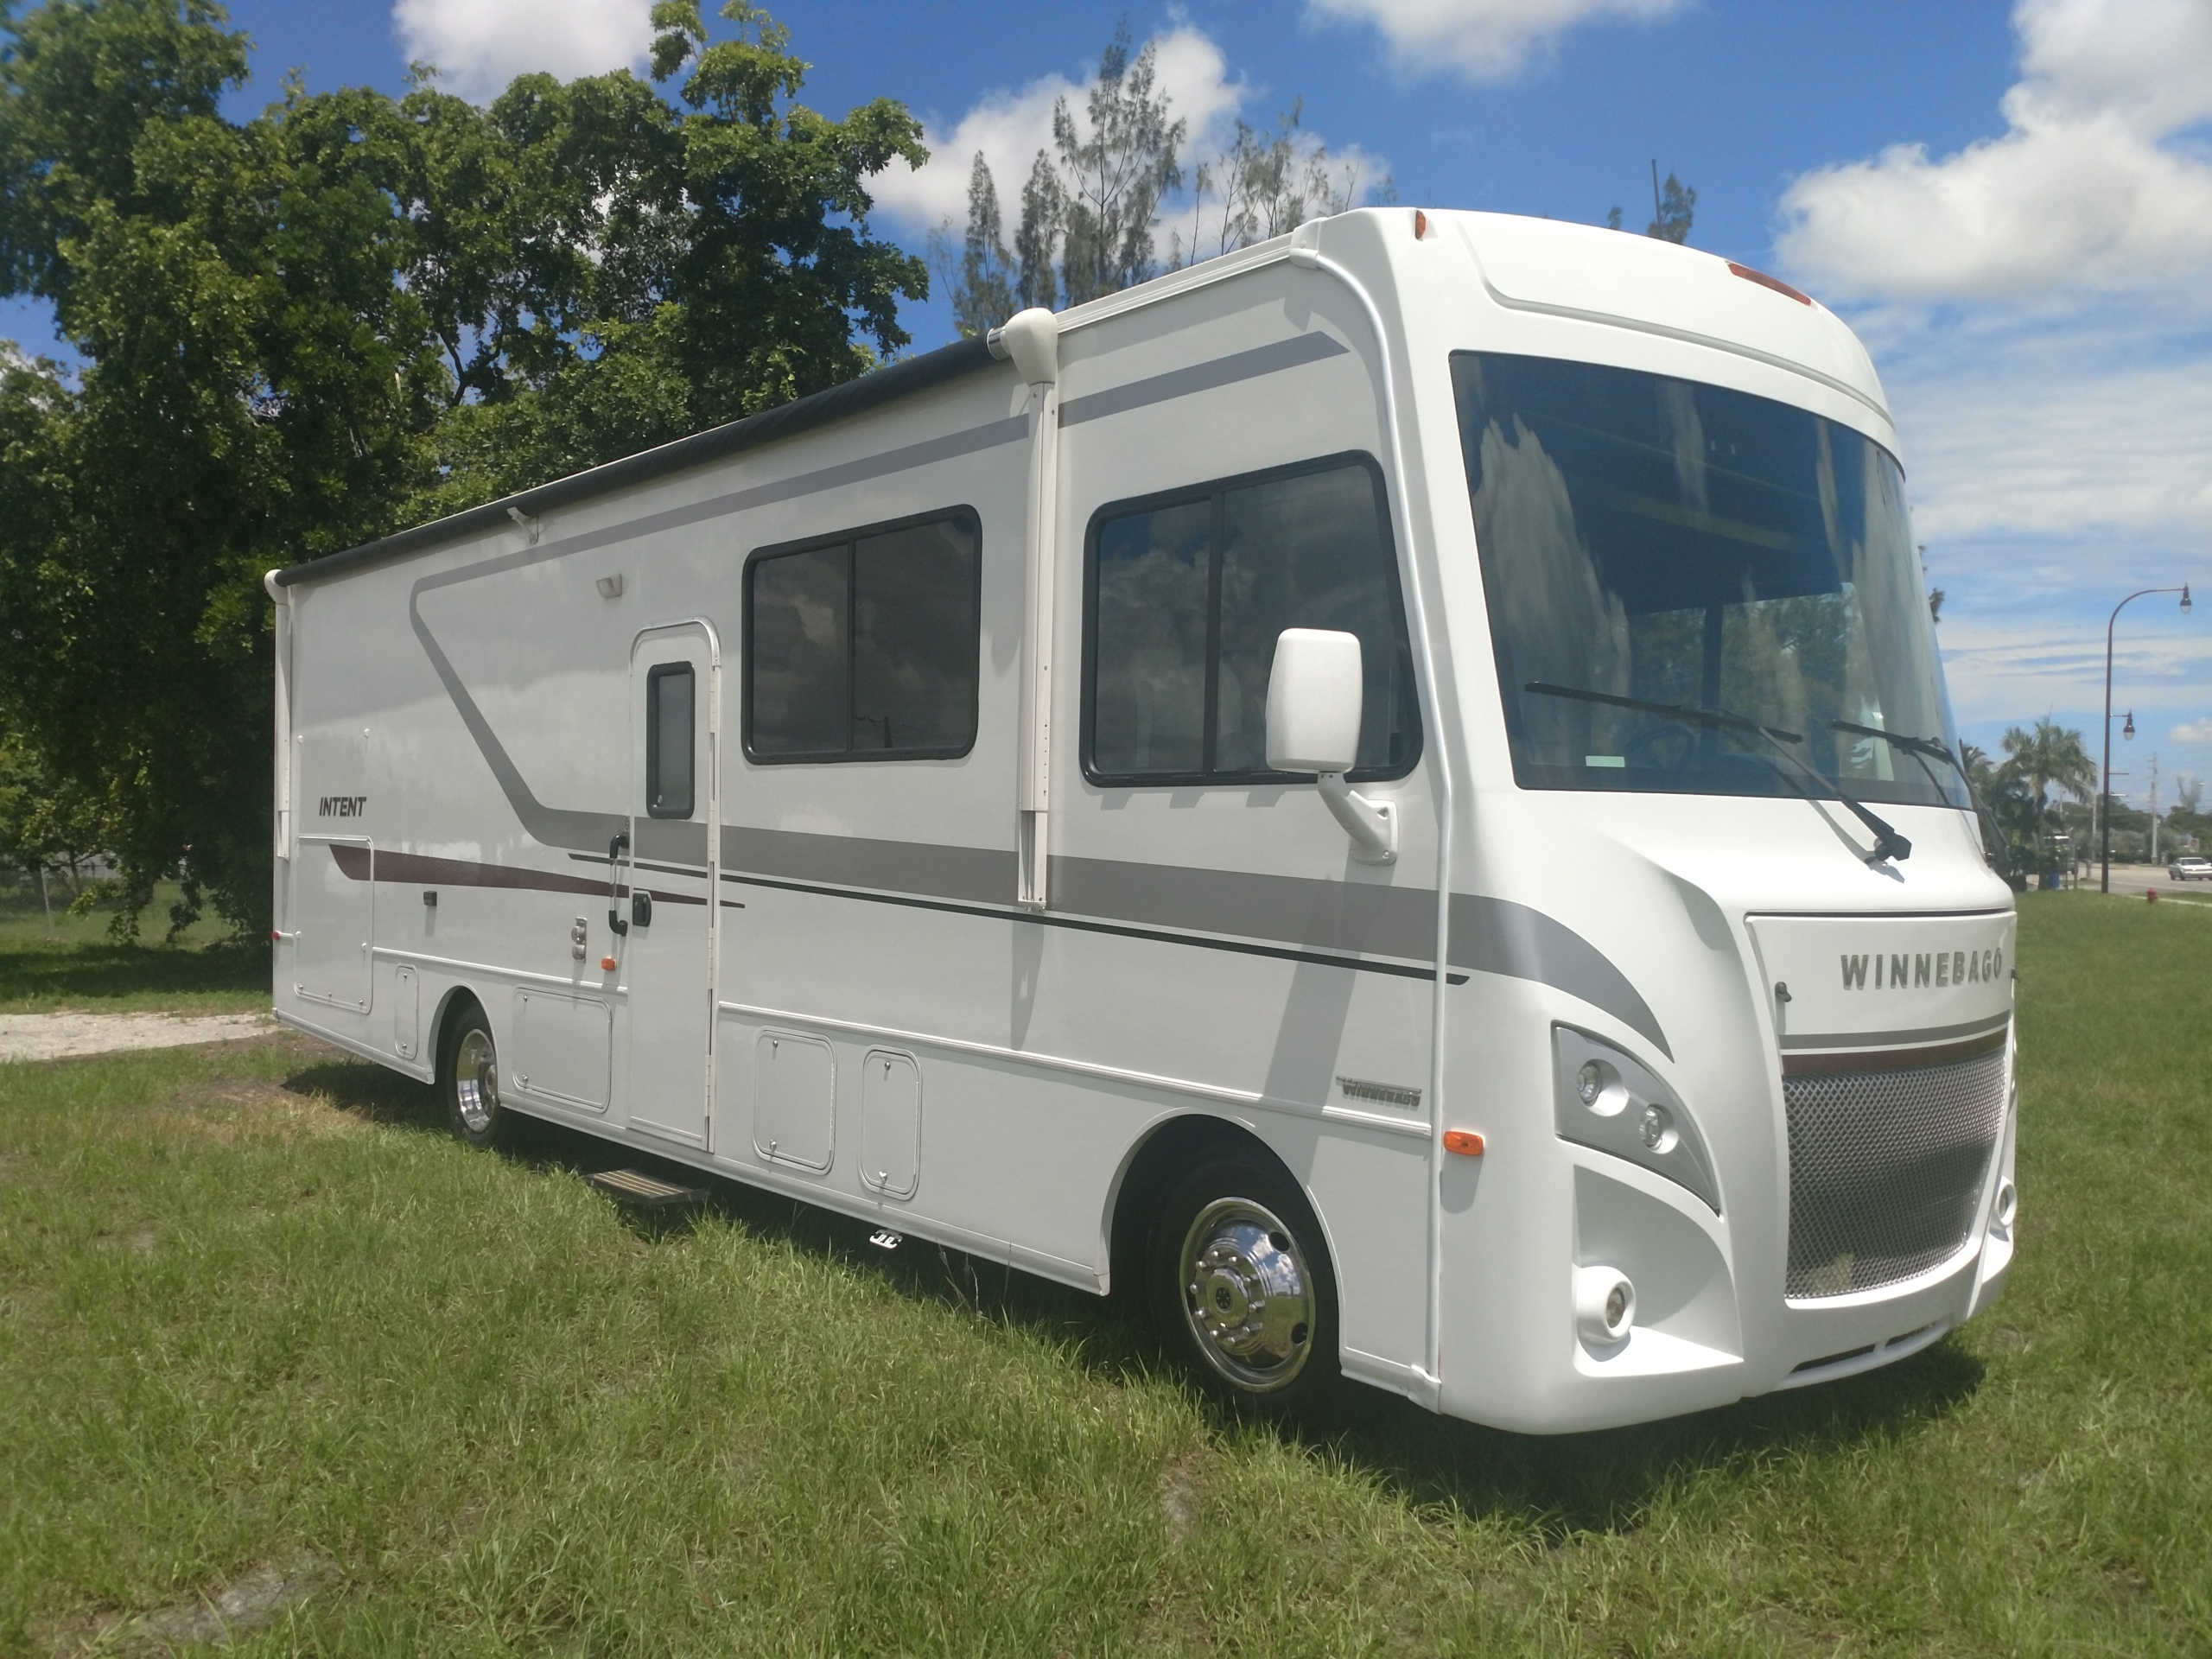 What To Do With Your RV When You Return Home – RV Consignment in Miami